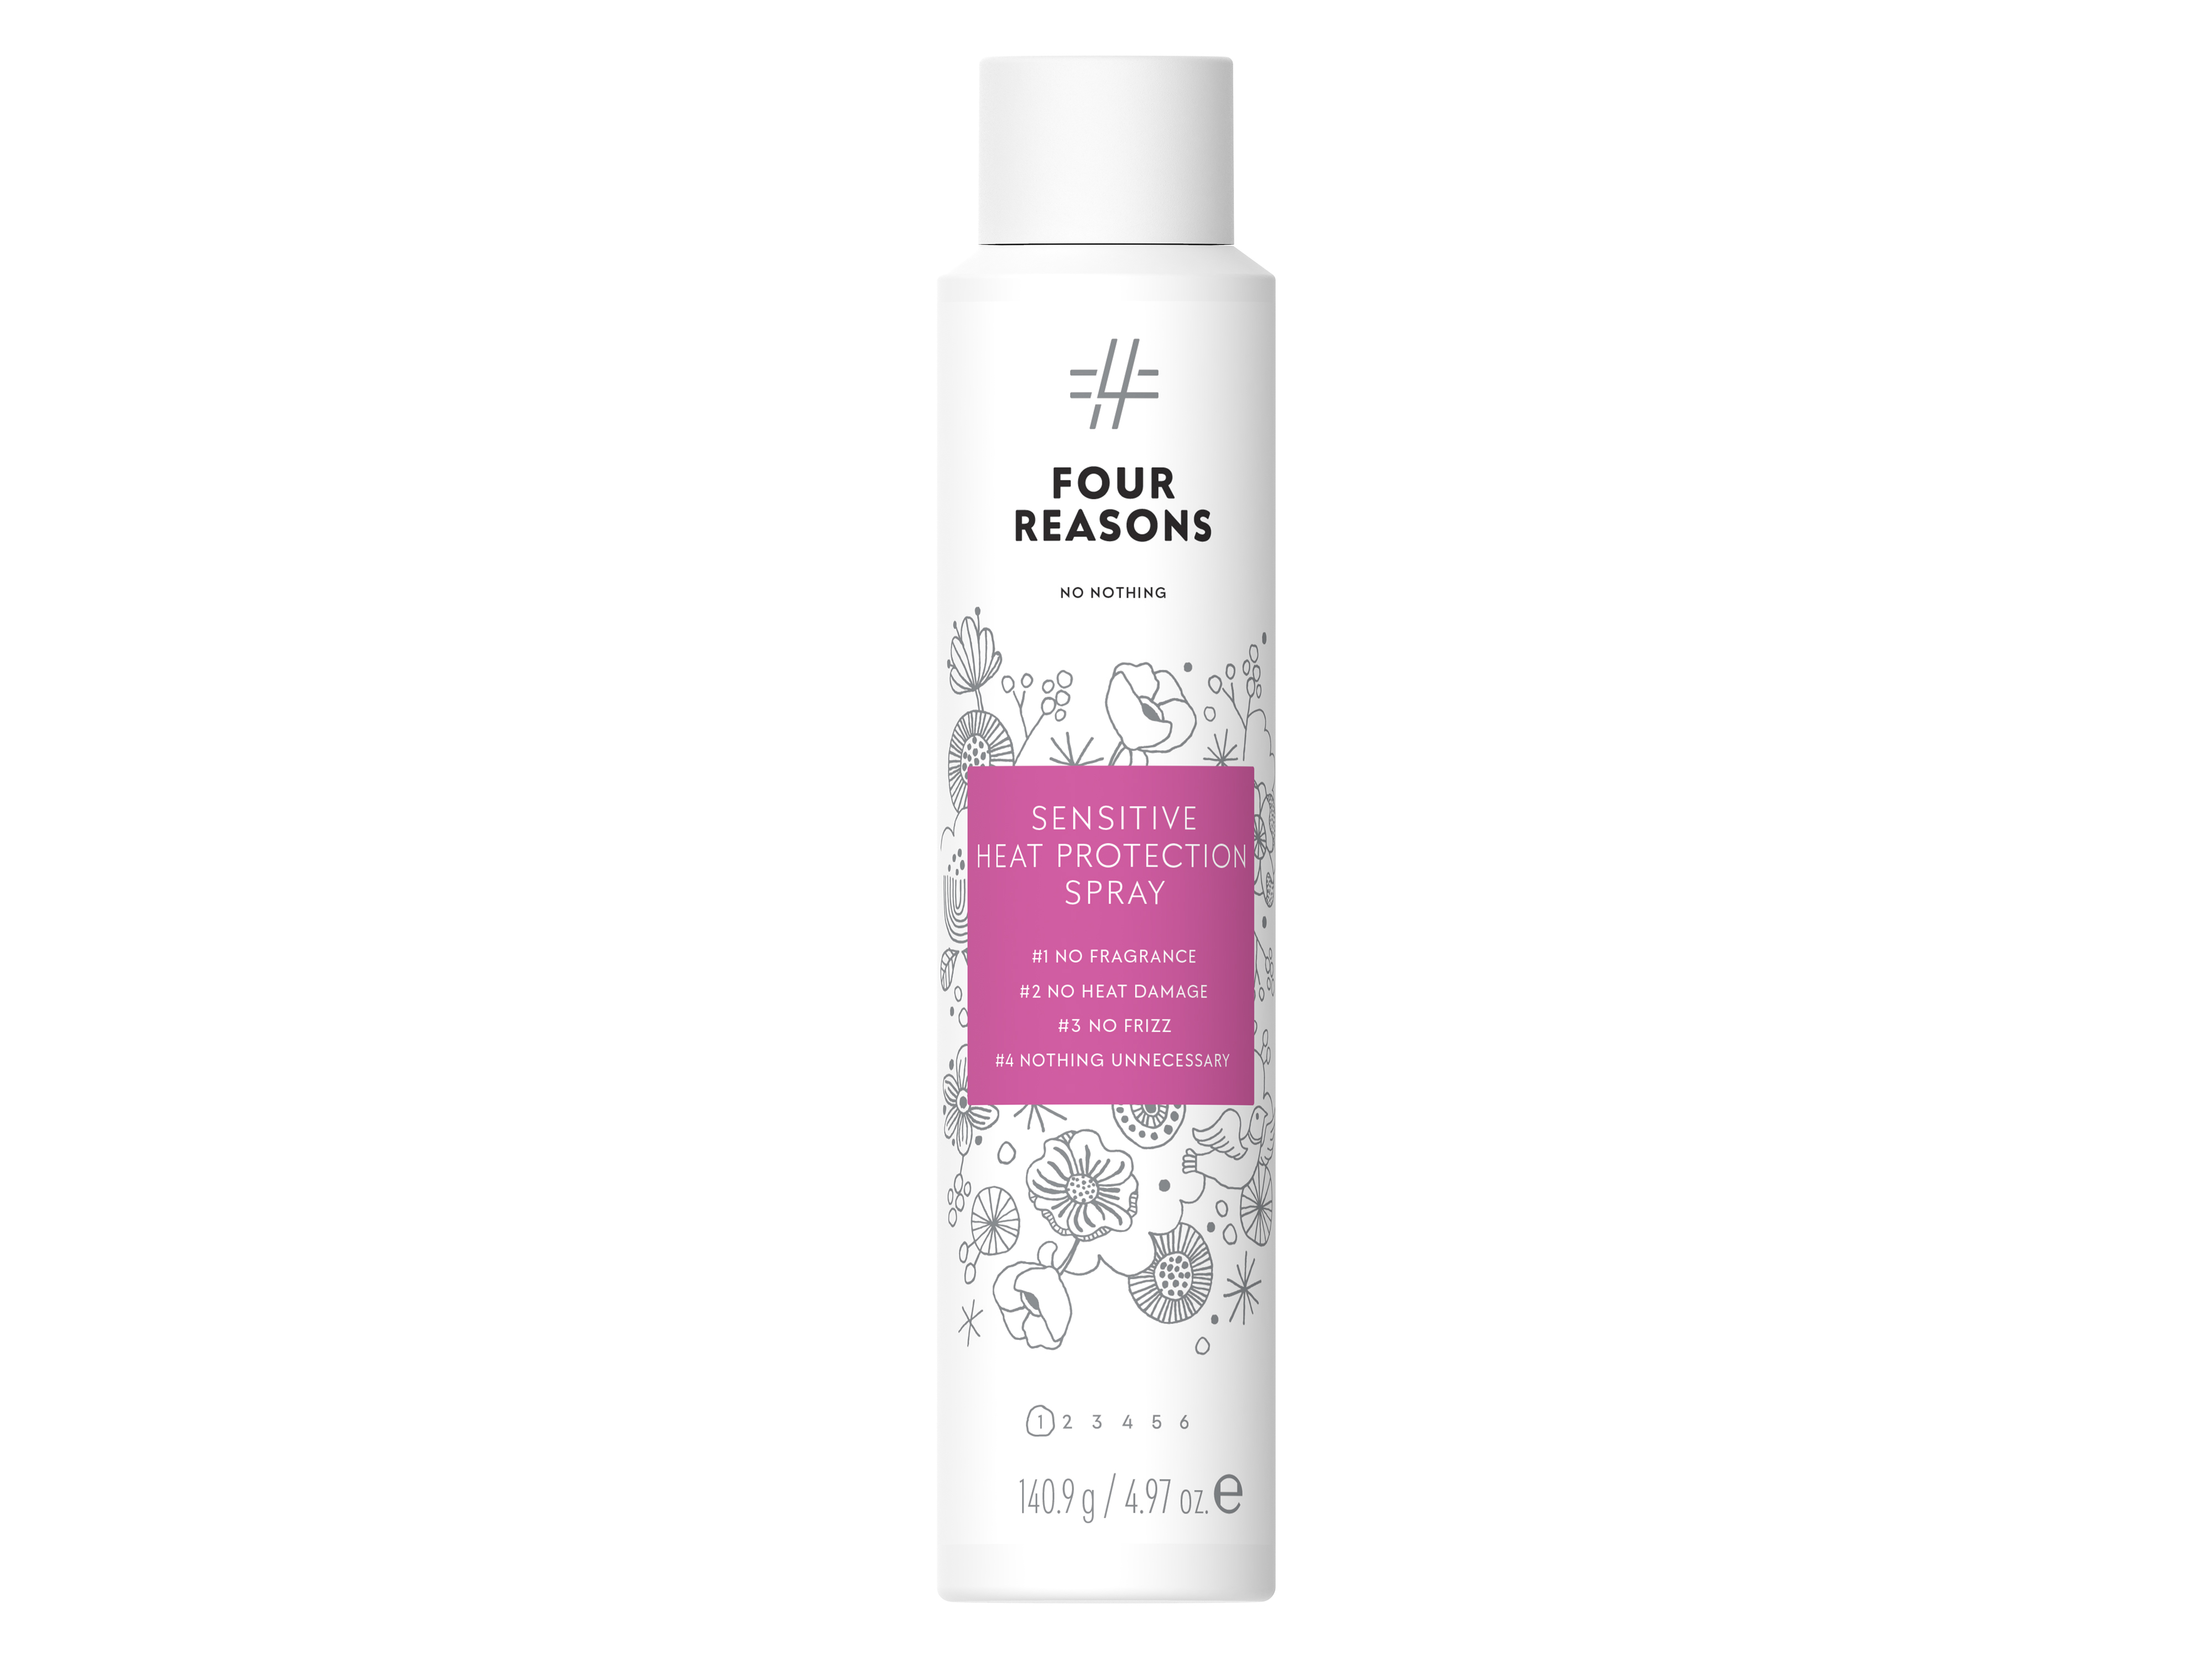 Four Reasons No Nothing Sensitive Heat Protection Spray, 1 stk